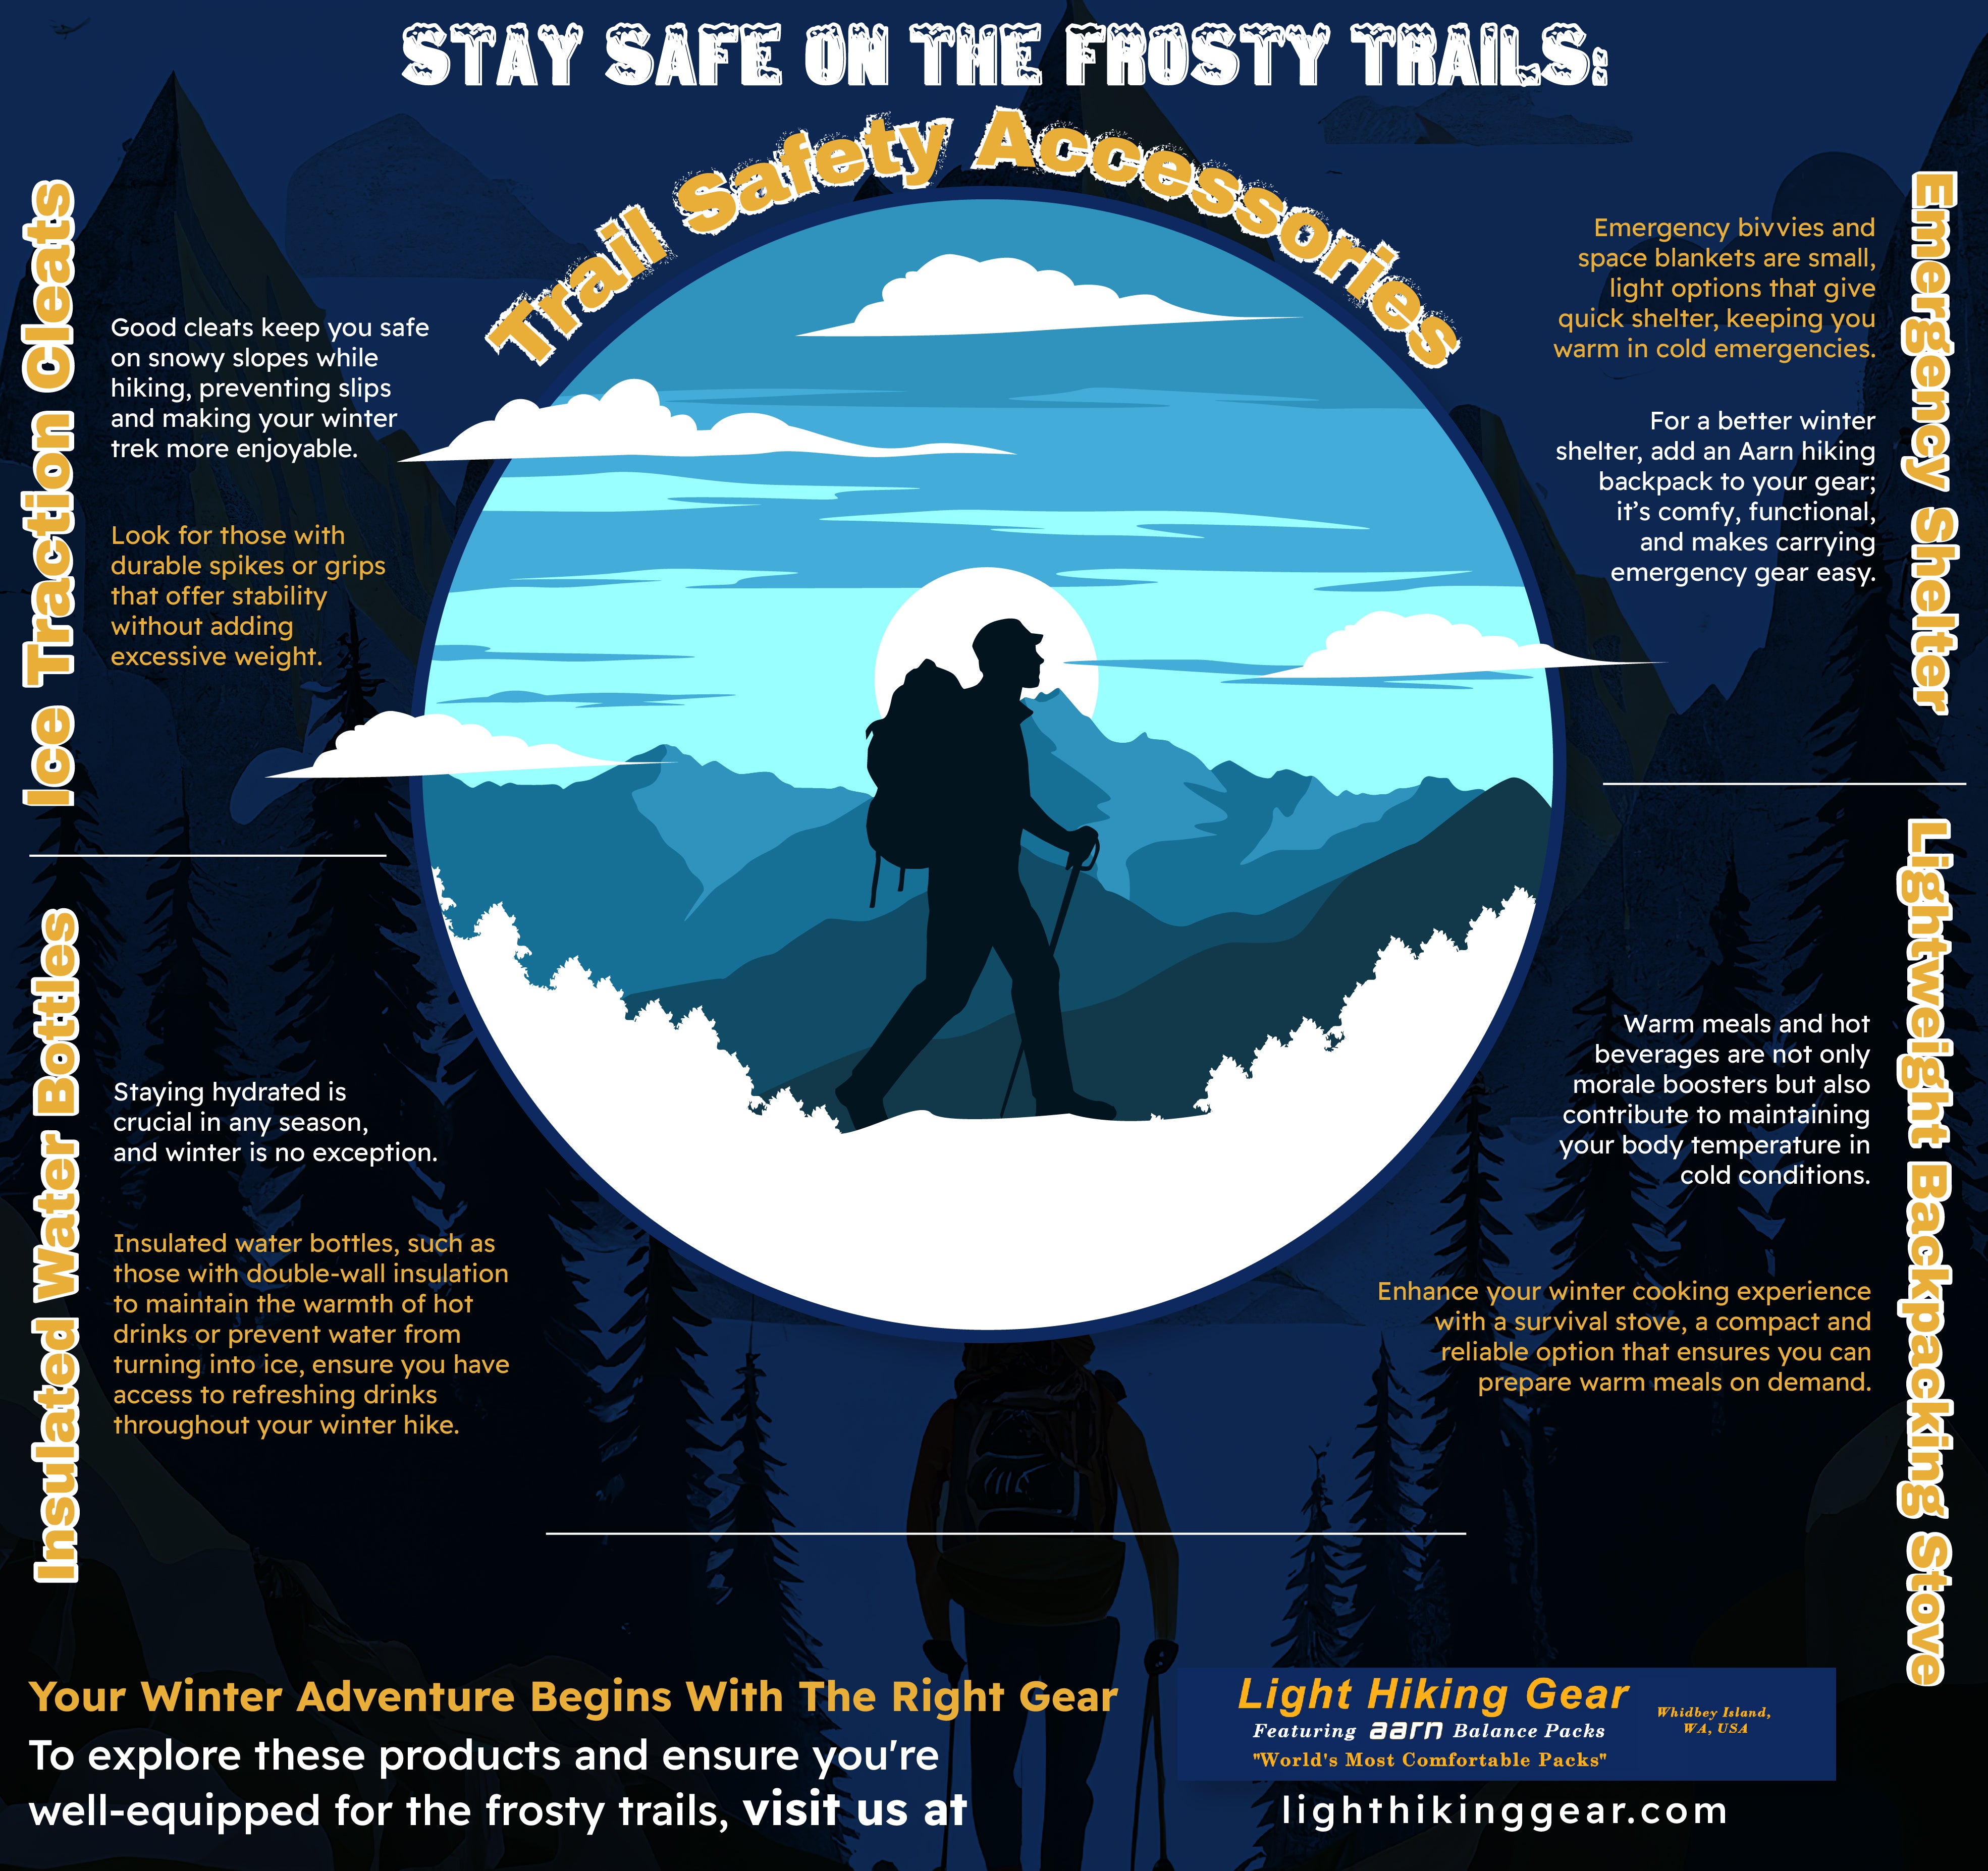 Stay Safe on the Frosty Trails: Trail Safety Accessories